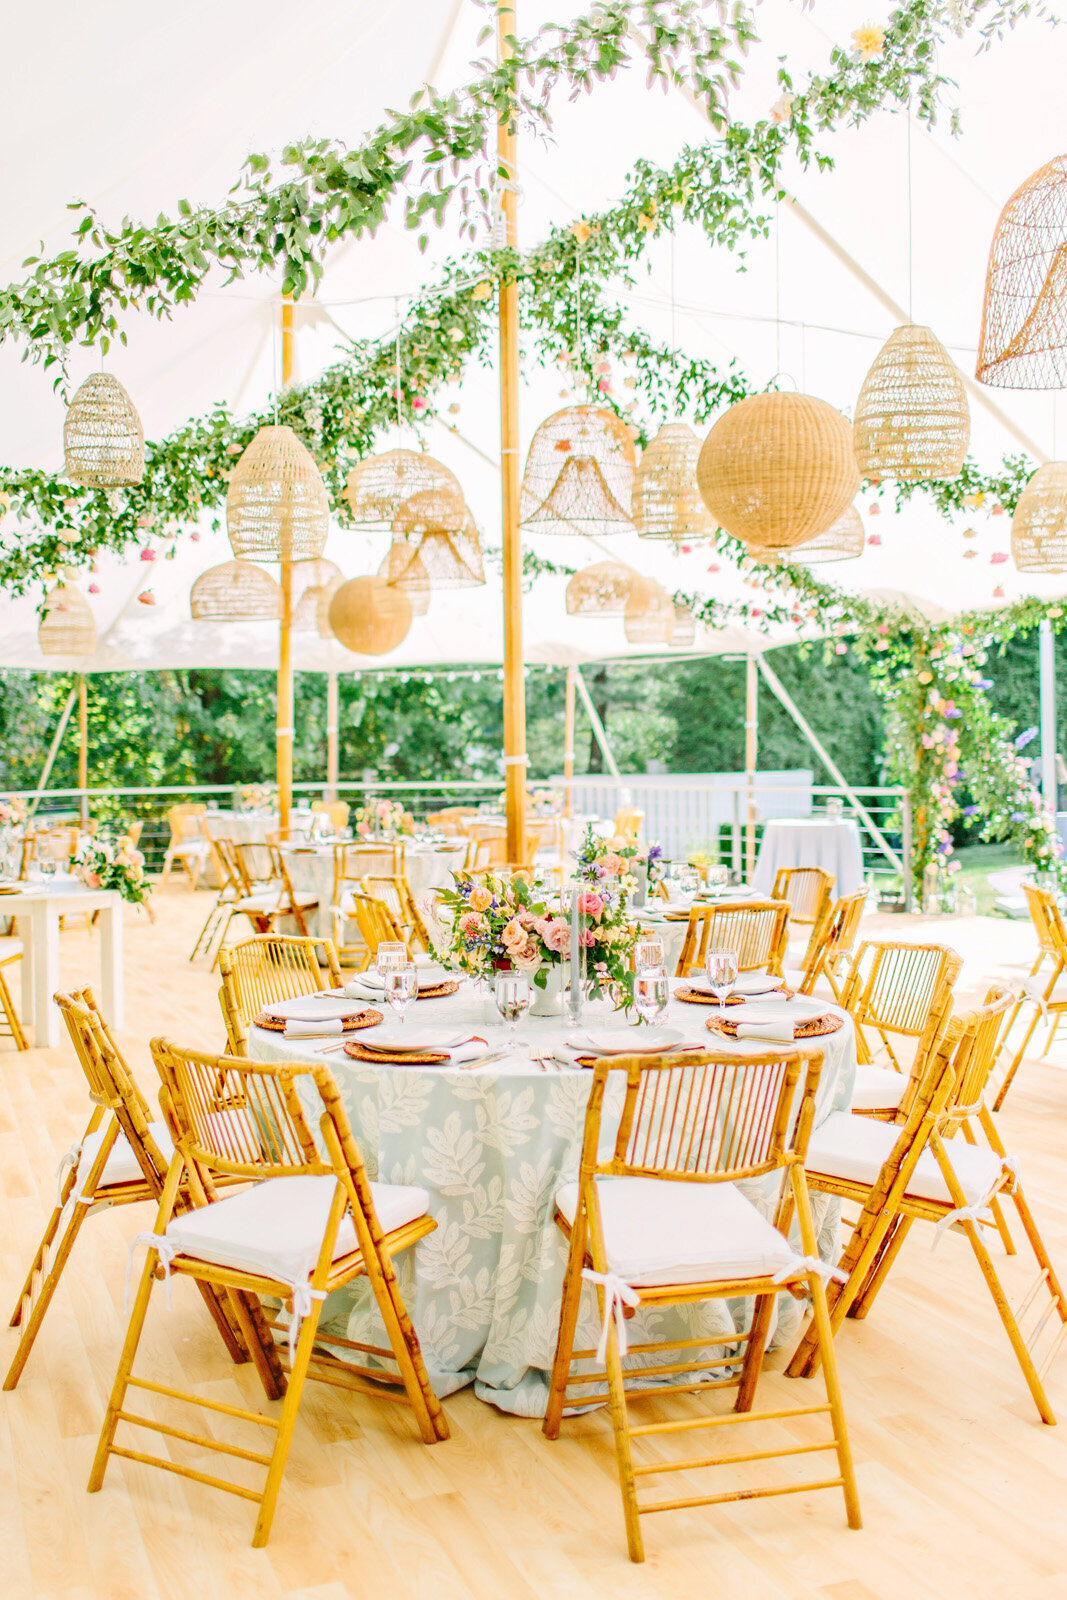 Kate-Murtaugh-Events-private-estate-tented-wedding-planner-floating-flowers-MA